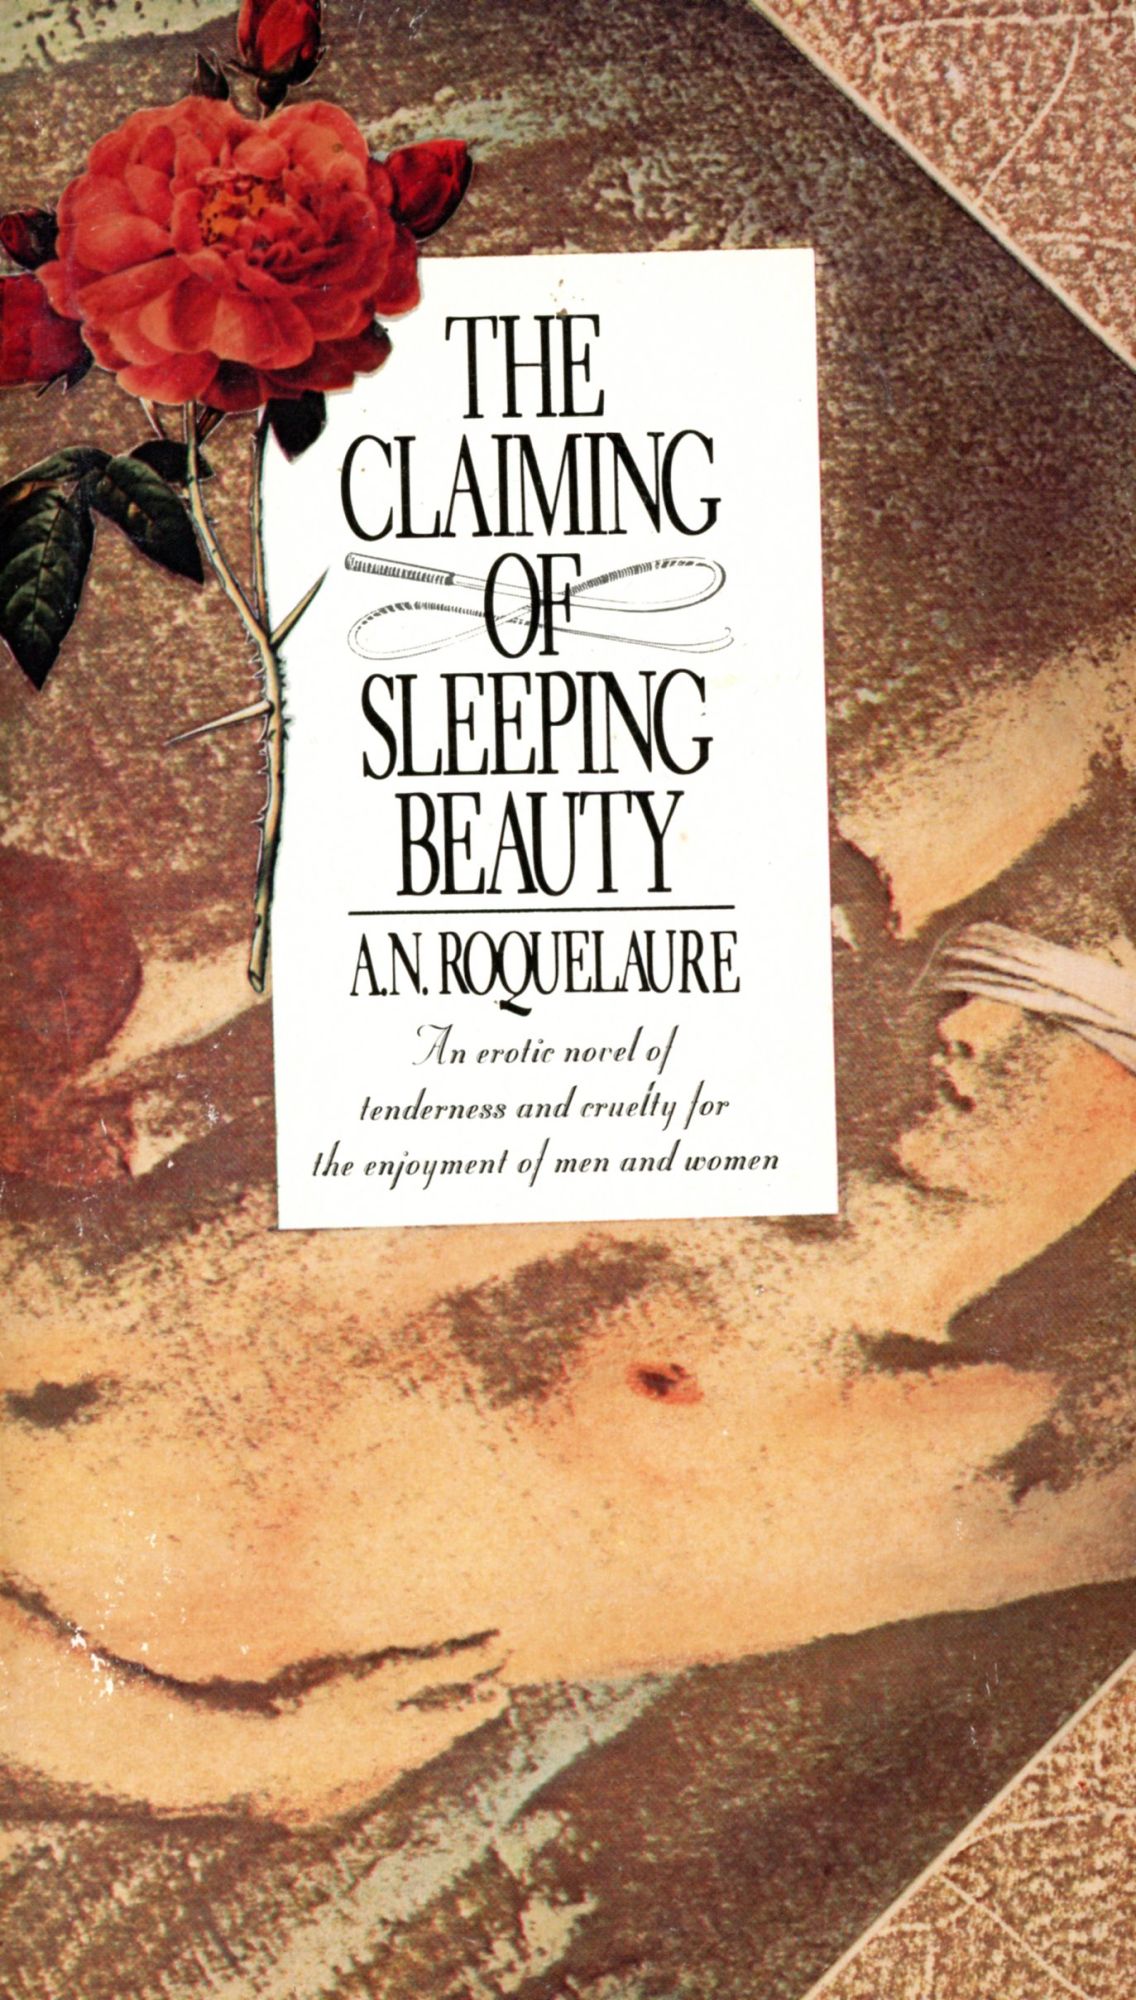 Beauty　Sleeping　N.　ROQUELAURE,　Anne　printing　Rice　Later　The　of　Claiming　A.